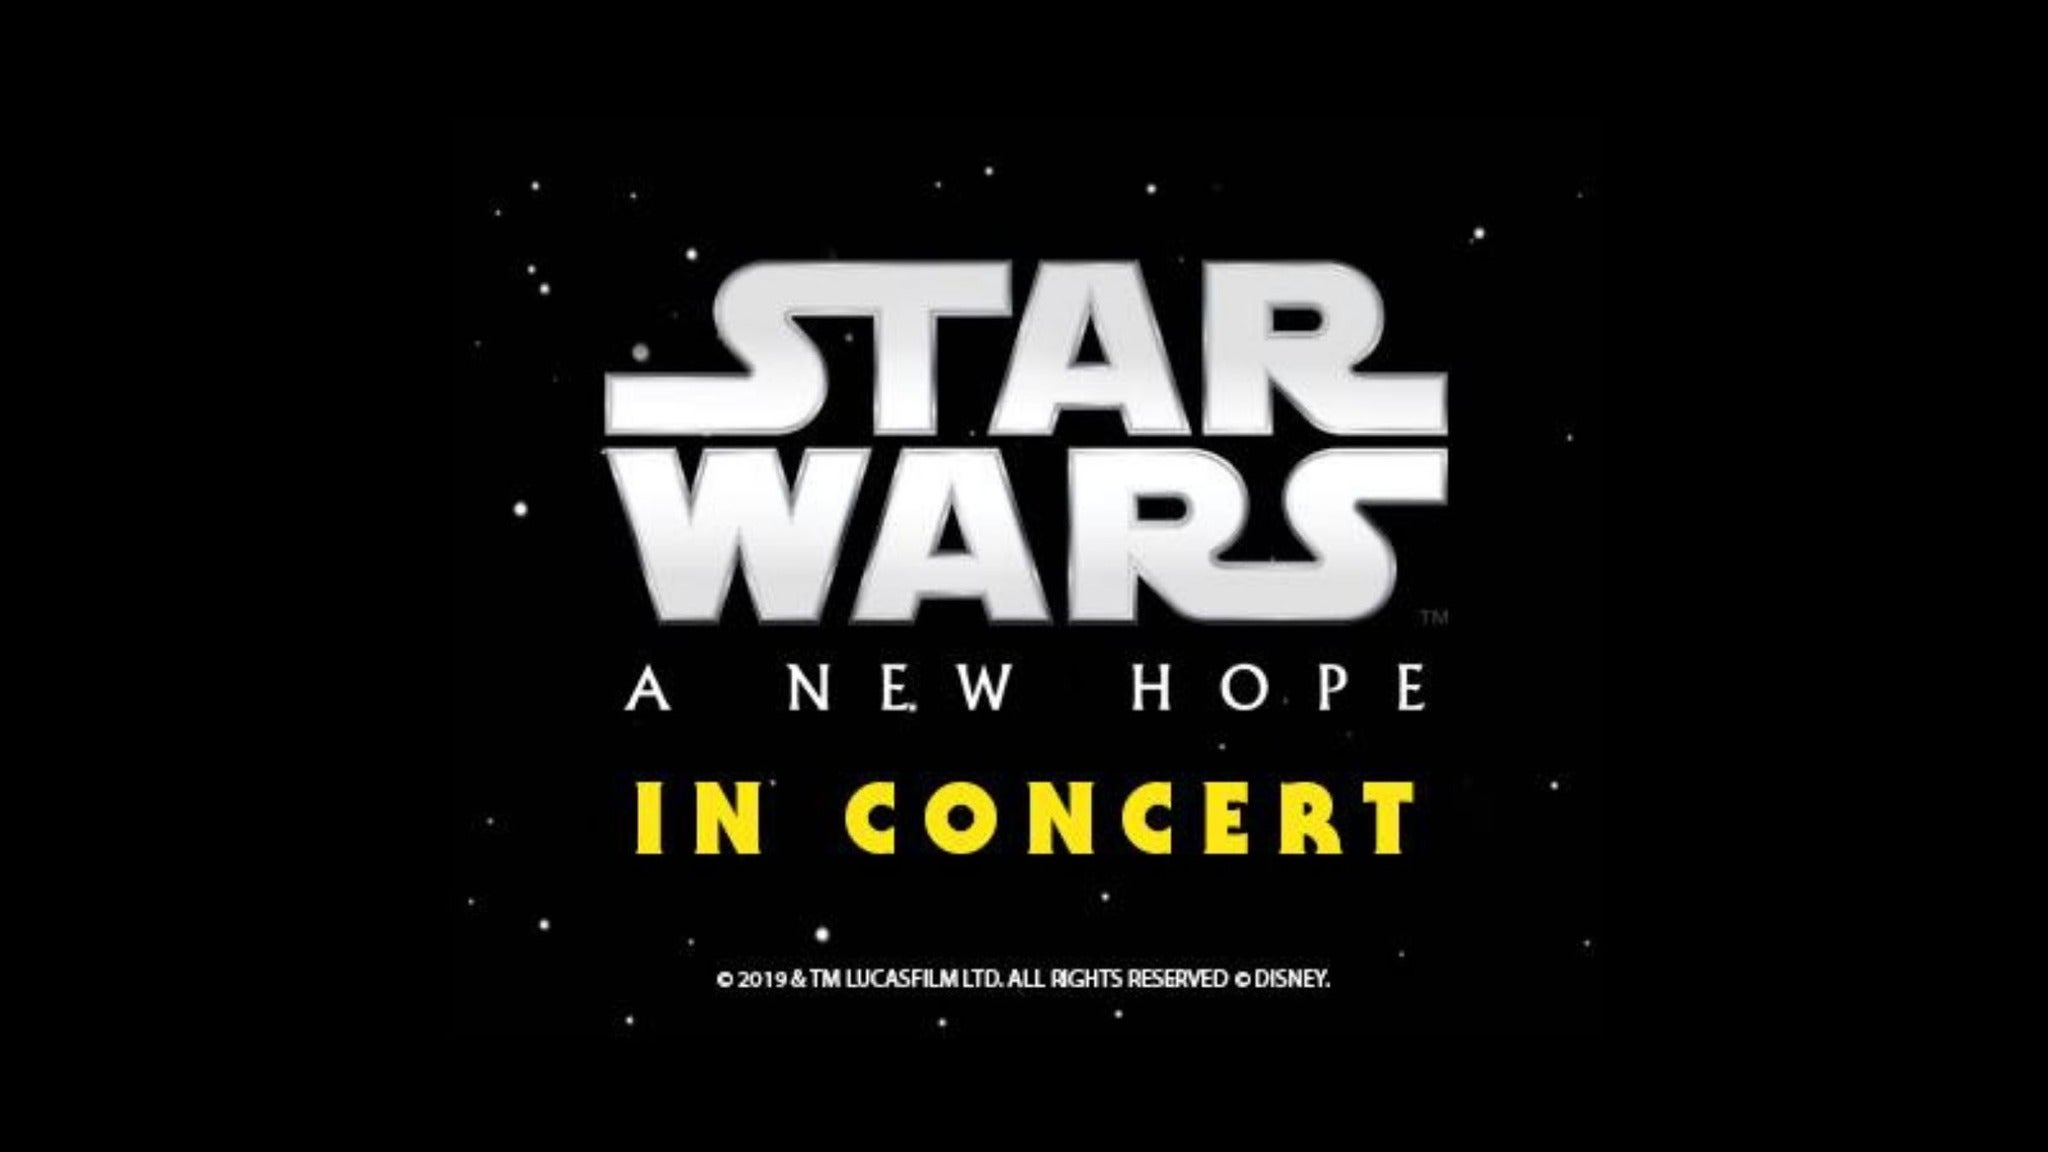 Star Wars: A New Hope - In Concert pre-sale code for approved tickets in Ottawa